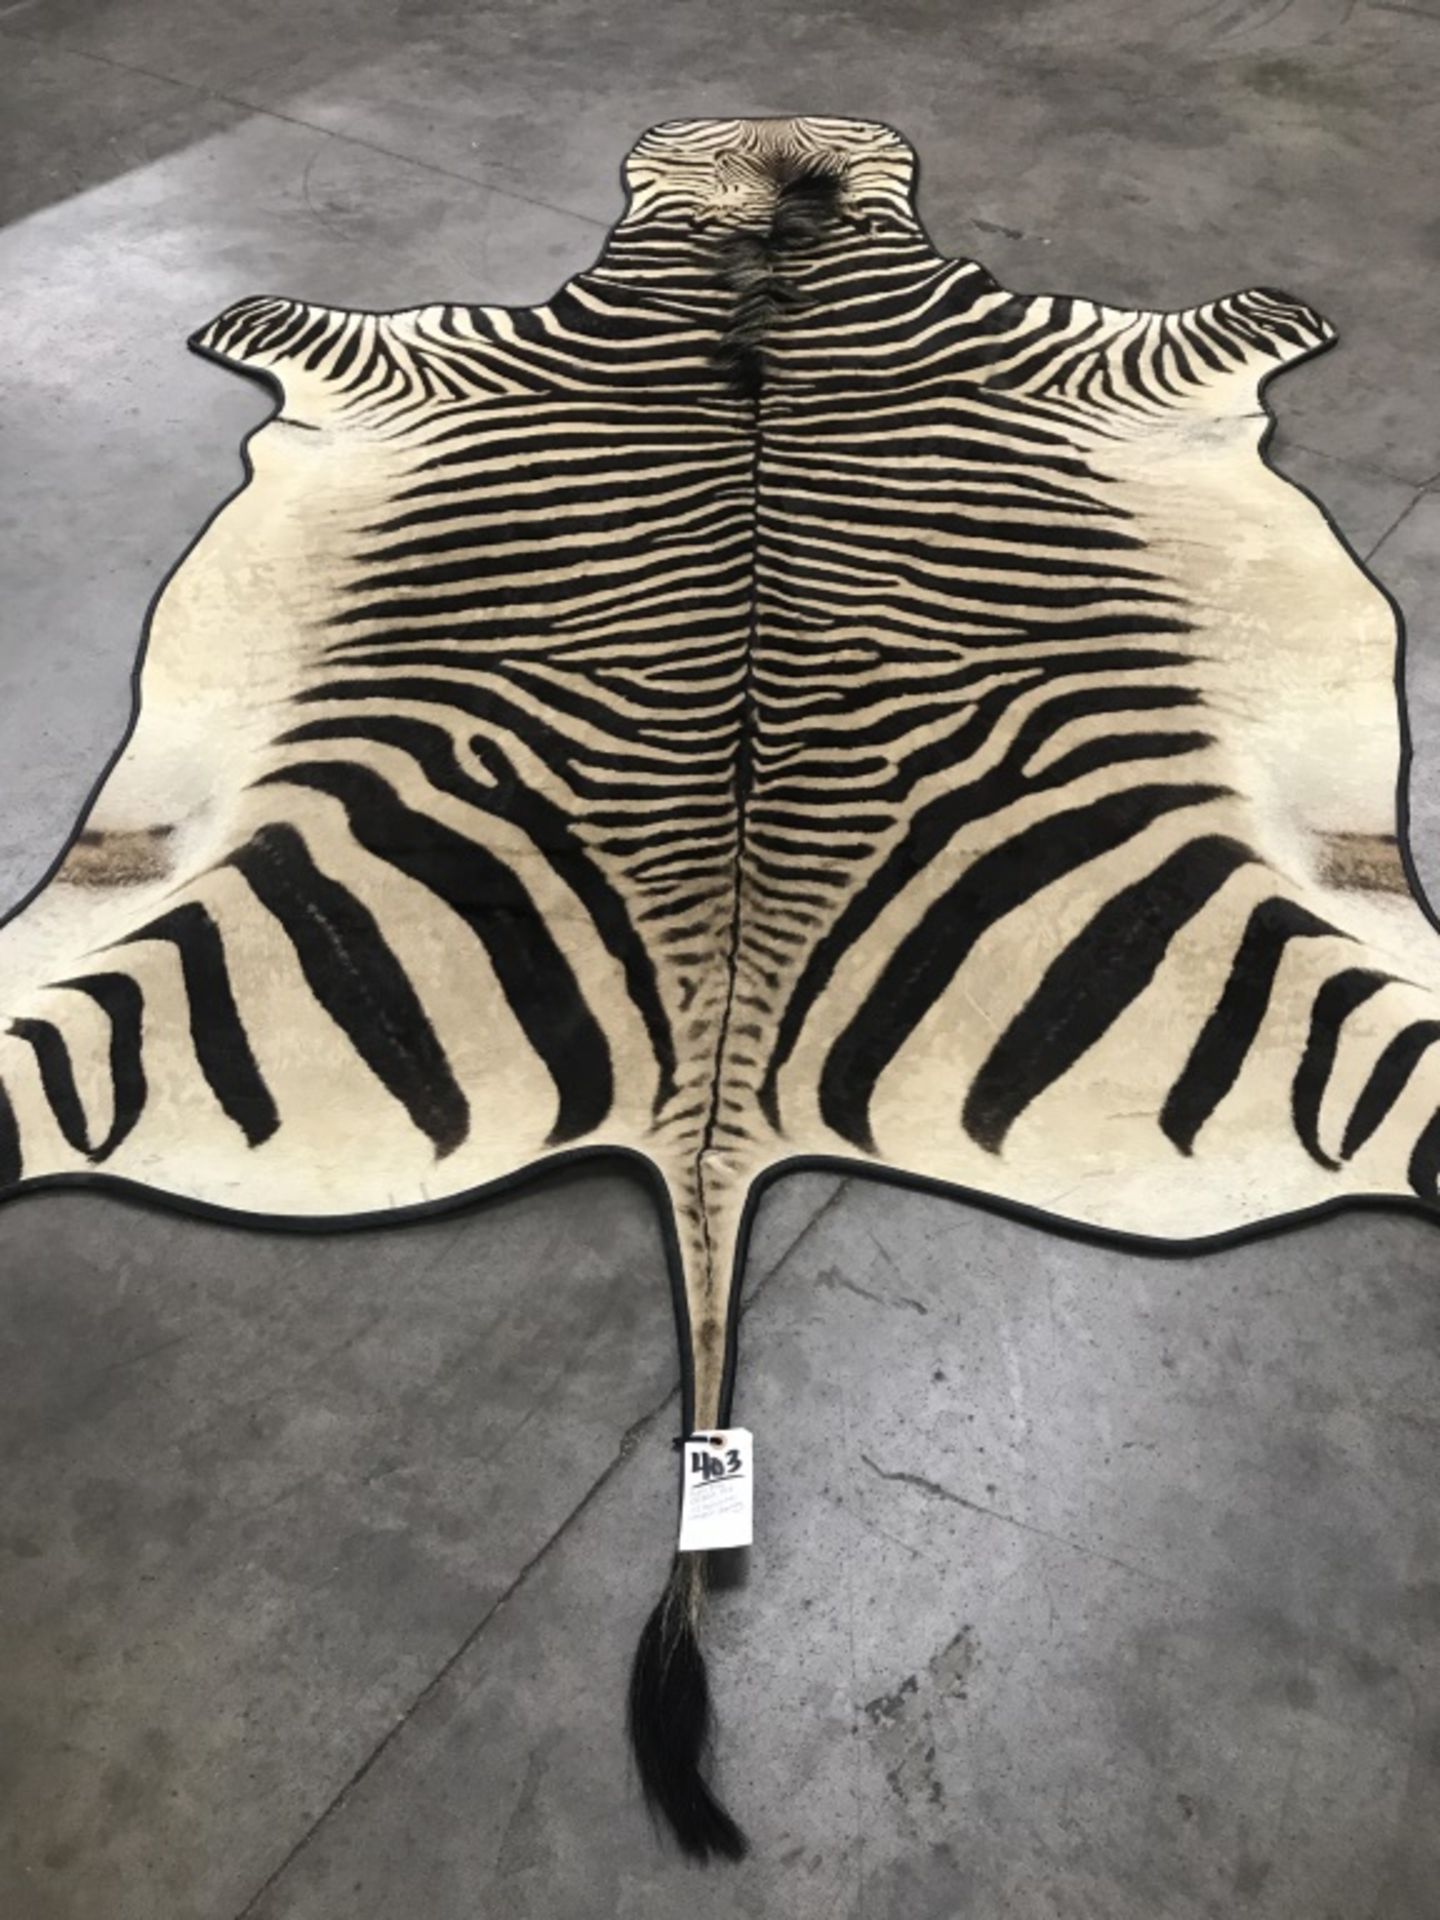 Very Nice Zebra Rug (TX Res. Only) - Image 9 of 13